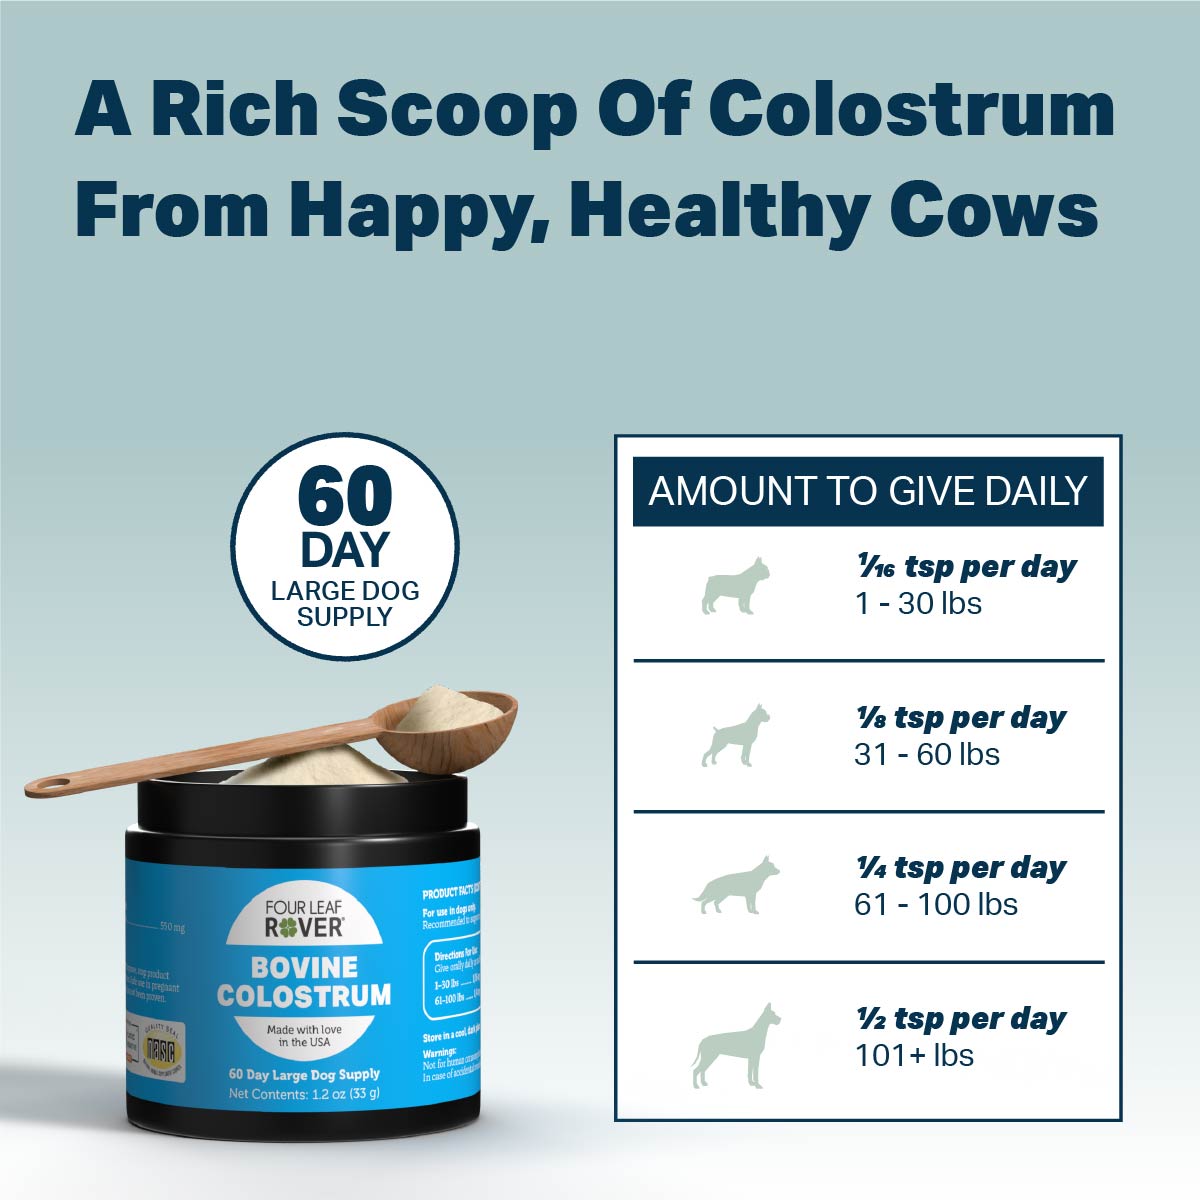 Four Leaf Rover Bovine Colostrum container with a wooden measuring spoon resting on top of the container. The text reads "A Rich Scoop Of Colostrum From Happy, Healthy Cows - 60 DAY LARGE DOG SUPPLY" The chart in the bottom right reads " AMOUNT TO GIVE DAILY 1/16 tsp per day 1 - 30 lbs 1/8 tsp per day 31-60 lbs 1/4 tsp per day 61-100 1/2 tsp per day 101+ lbs"